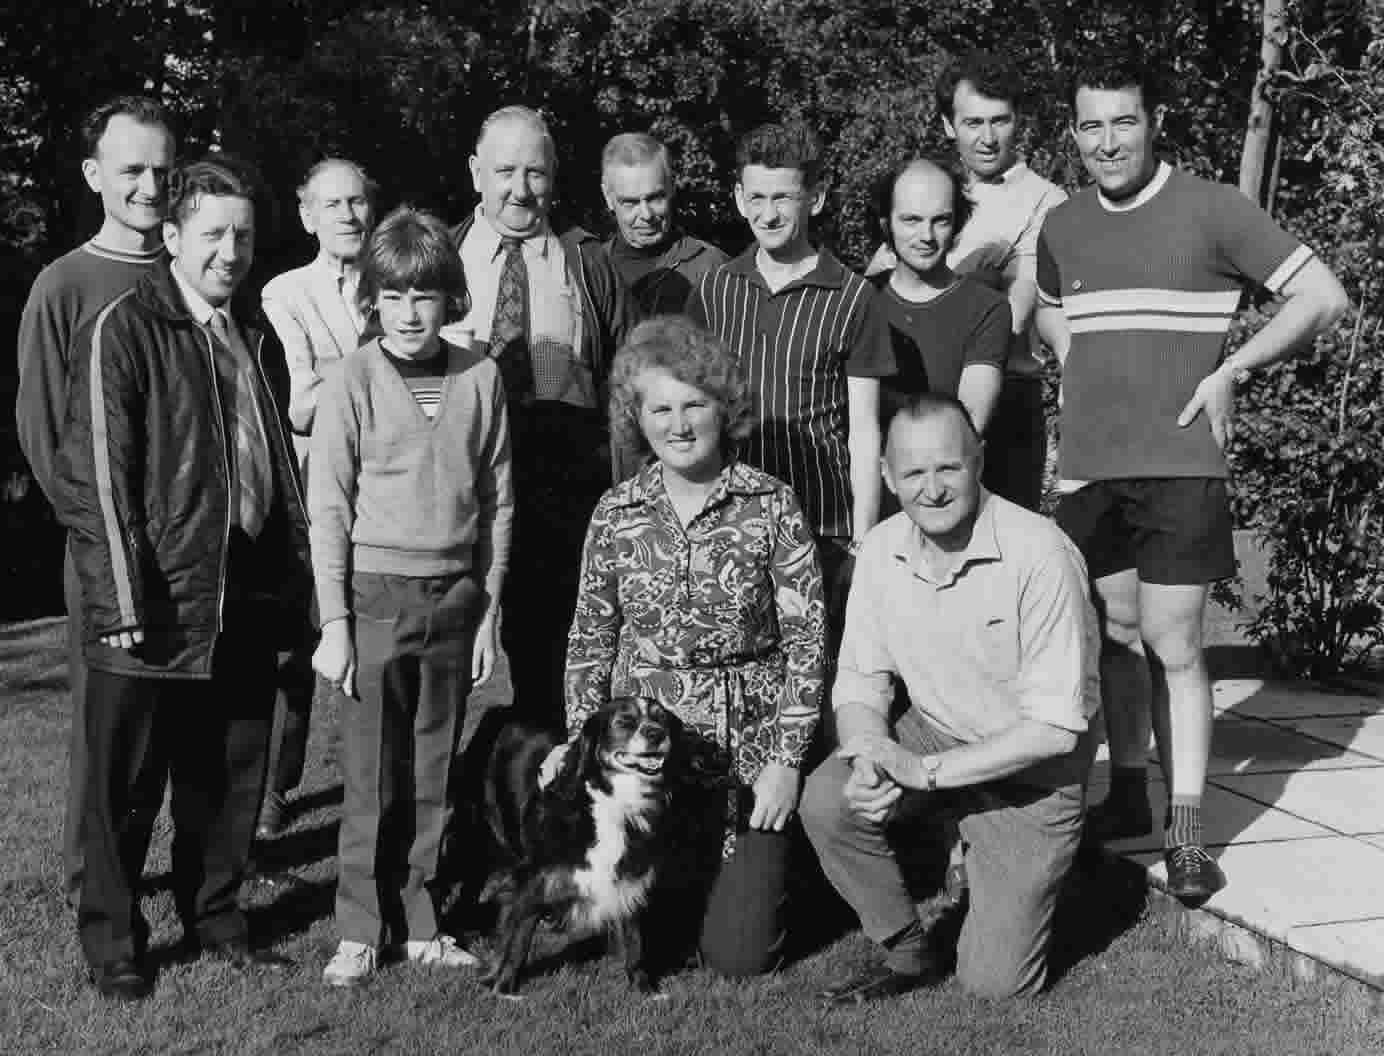 Club Tea at Pat Hill's. L-R: Peter Price, Alan Capon, Reg Fuller (a founder member), ?? Wilkins, Gordon Cronk, ??, Laurie Broad, ??, Ted Hill, ??. Kneeling - Pat Hill and Aubrey Ring